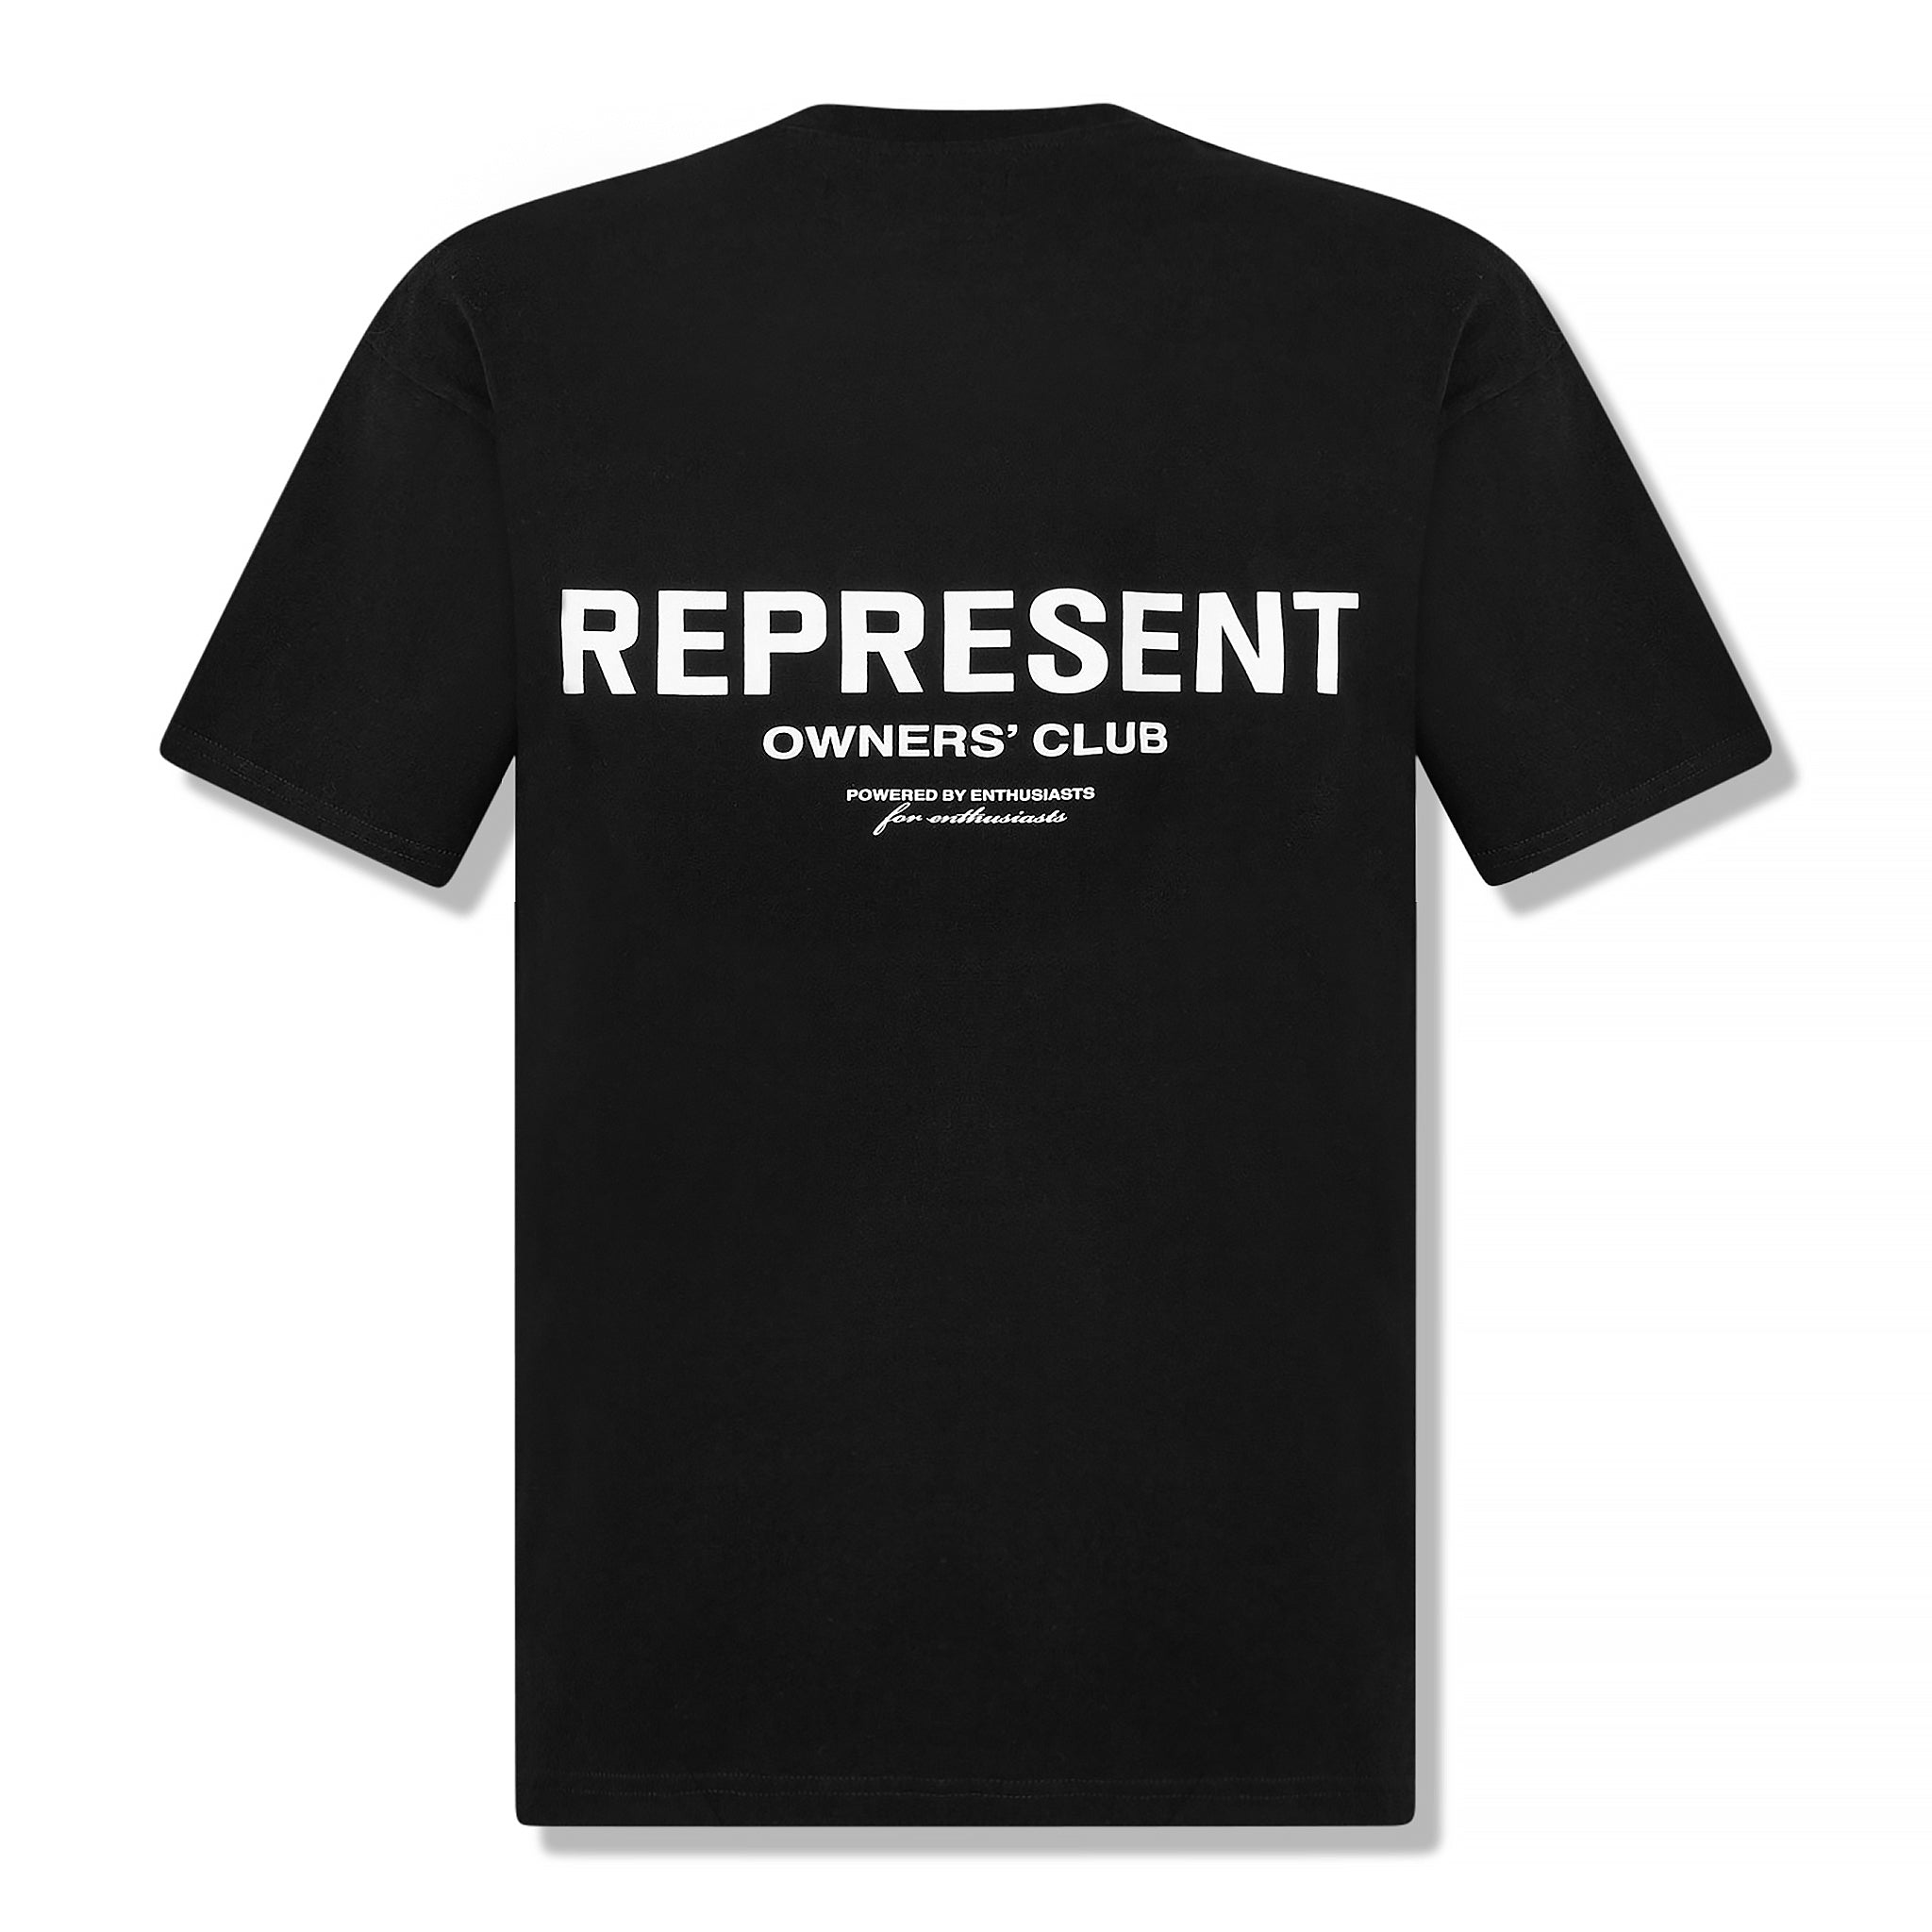 Back view of Represent Owners Club Black T Shirt M05149-01